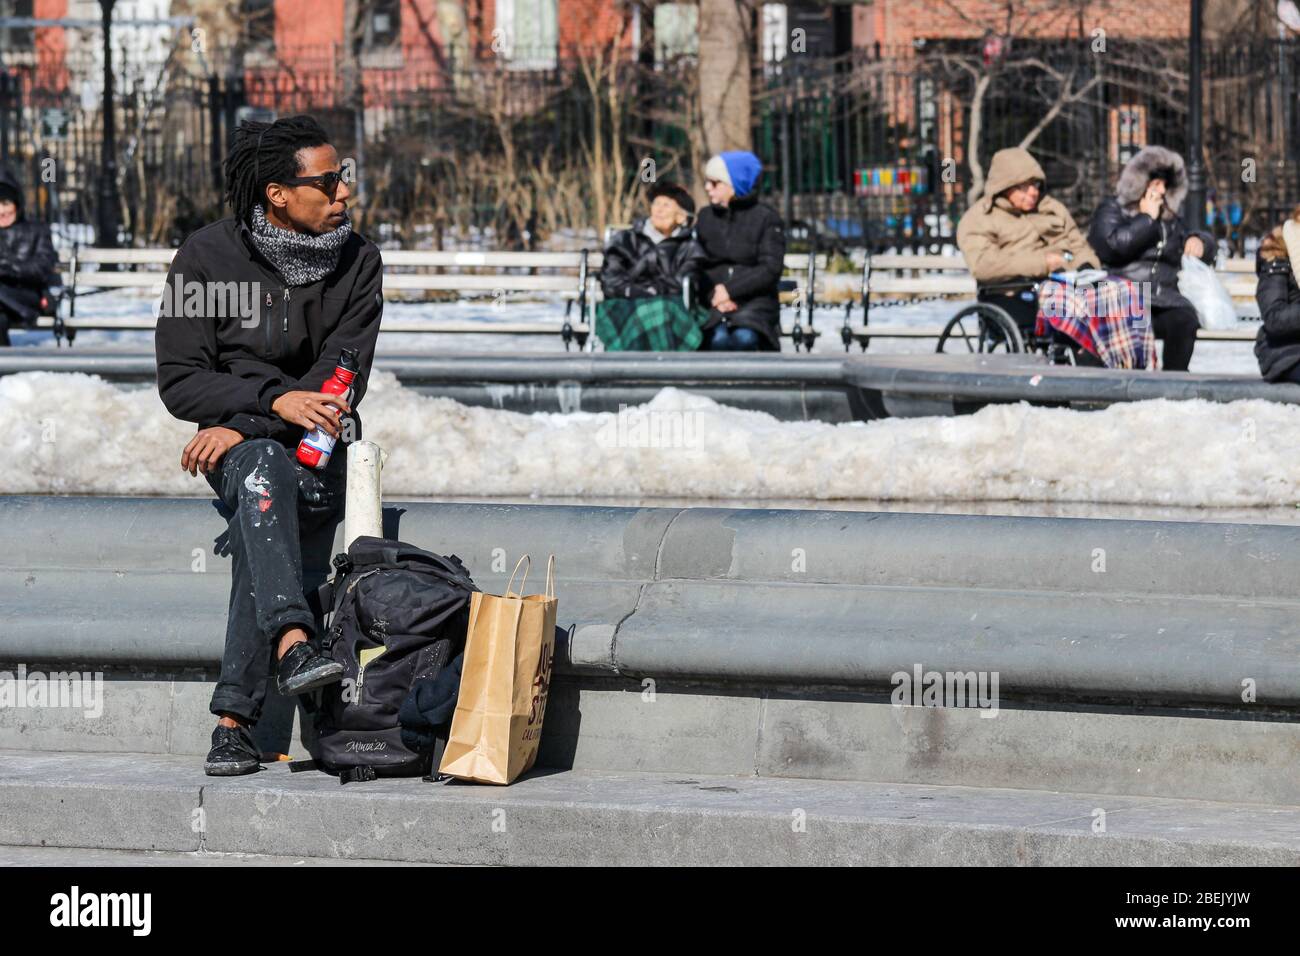 Man with paint stains on his trousers having a lunch break in Washington Square Park in Manhattan, New York City, United States of America Stock Photo